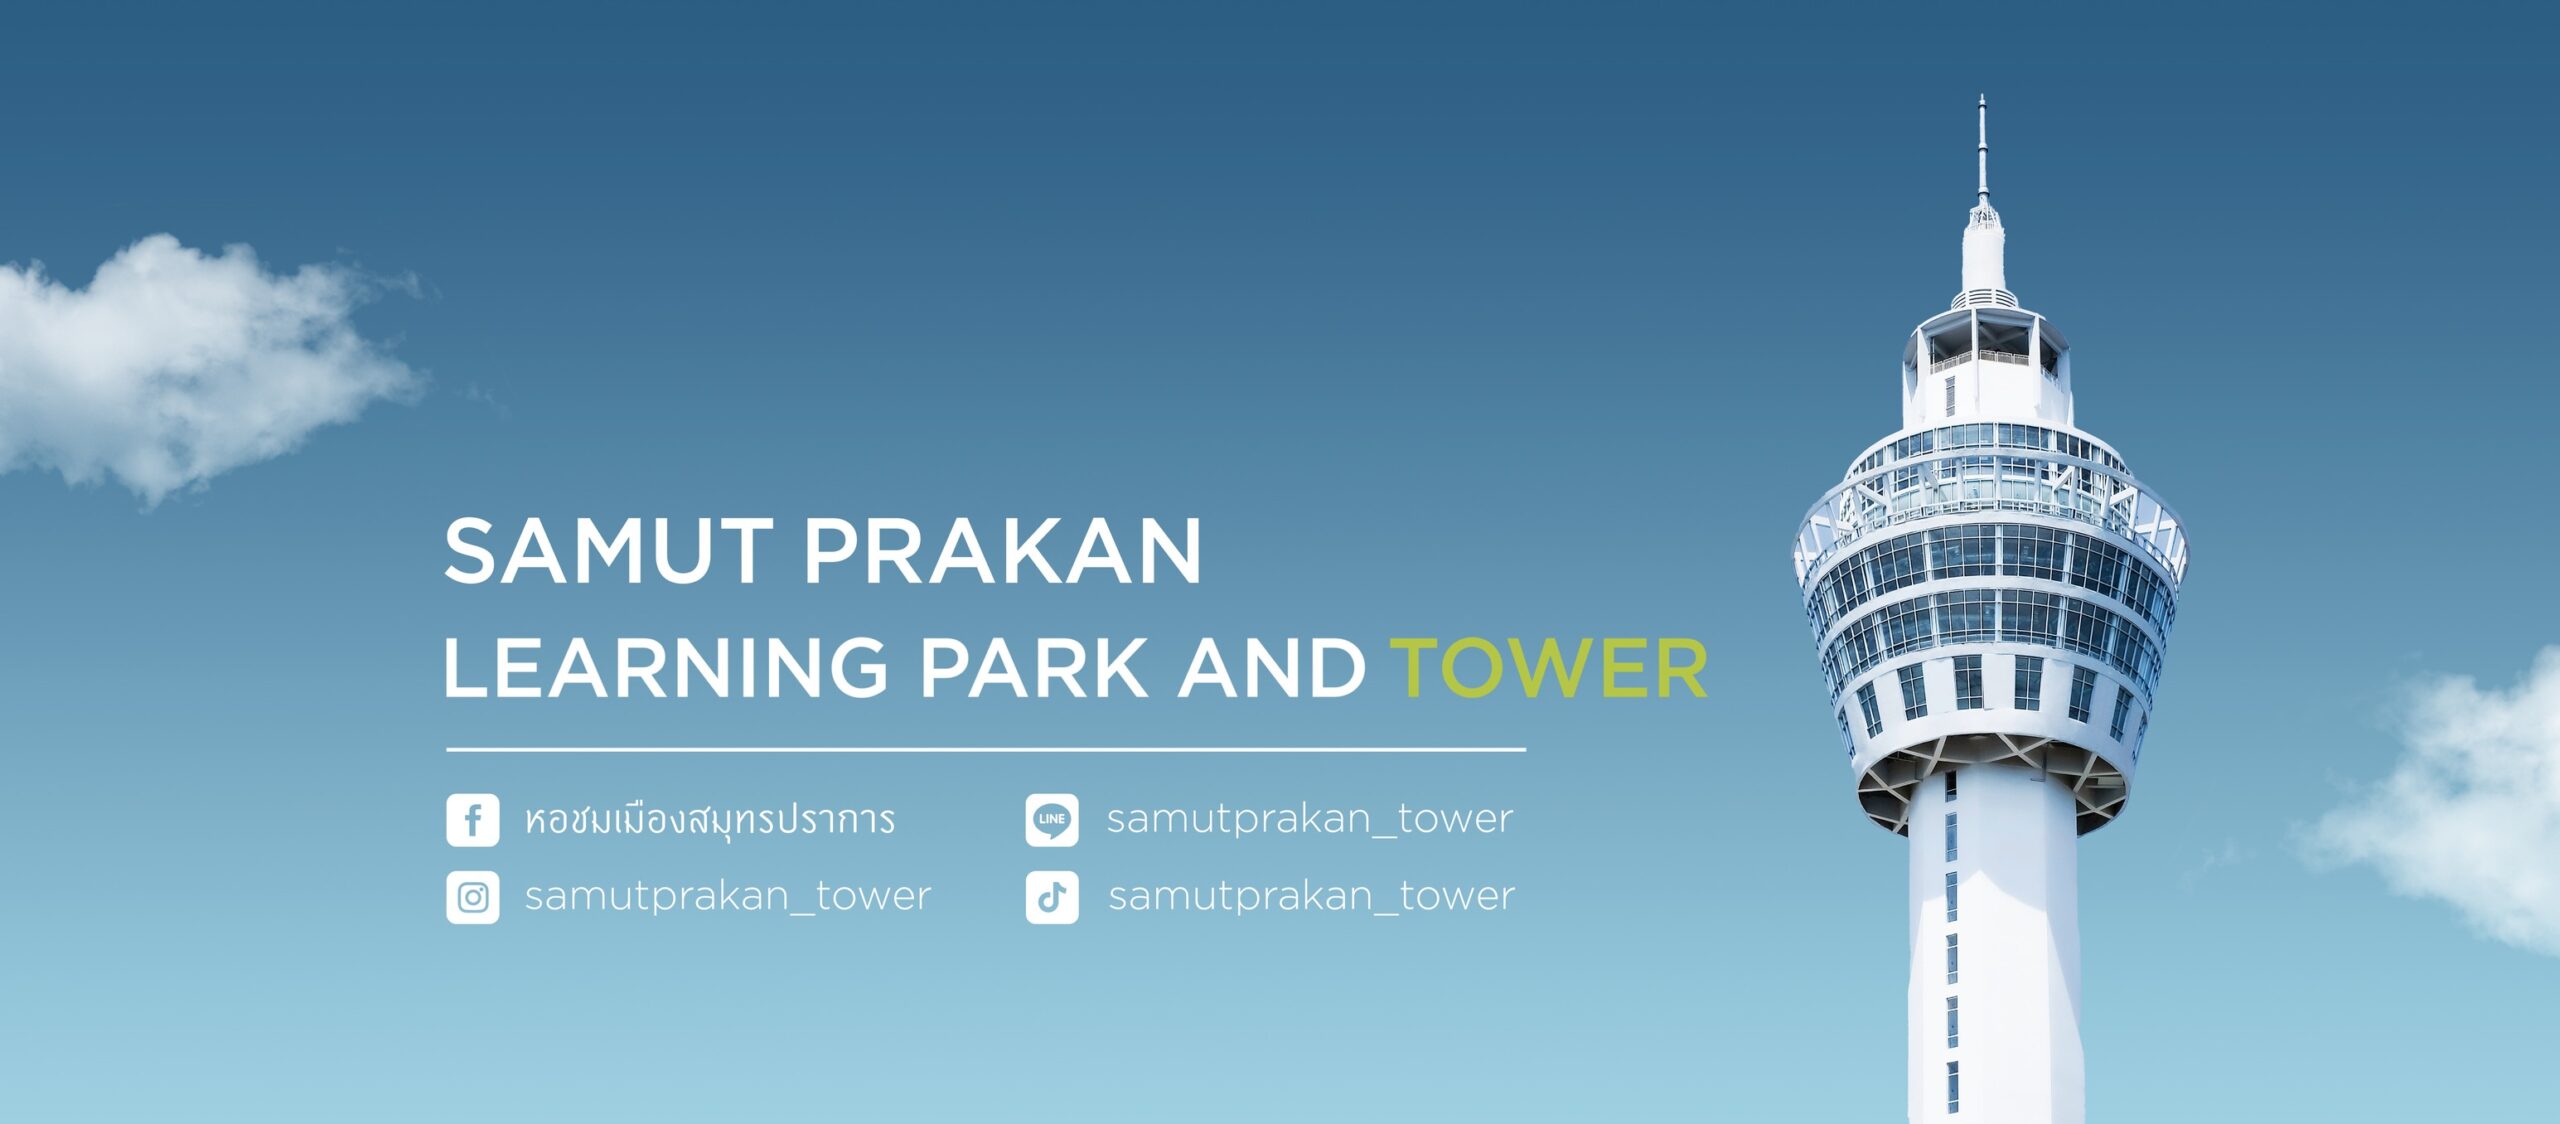 Samut Prakan Learning Park And Tower scaled